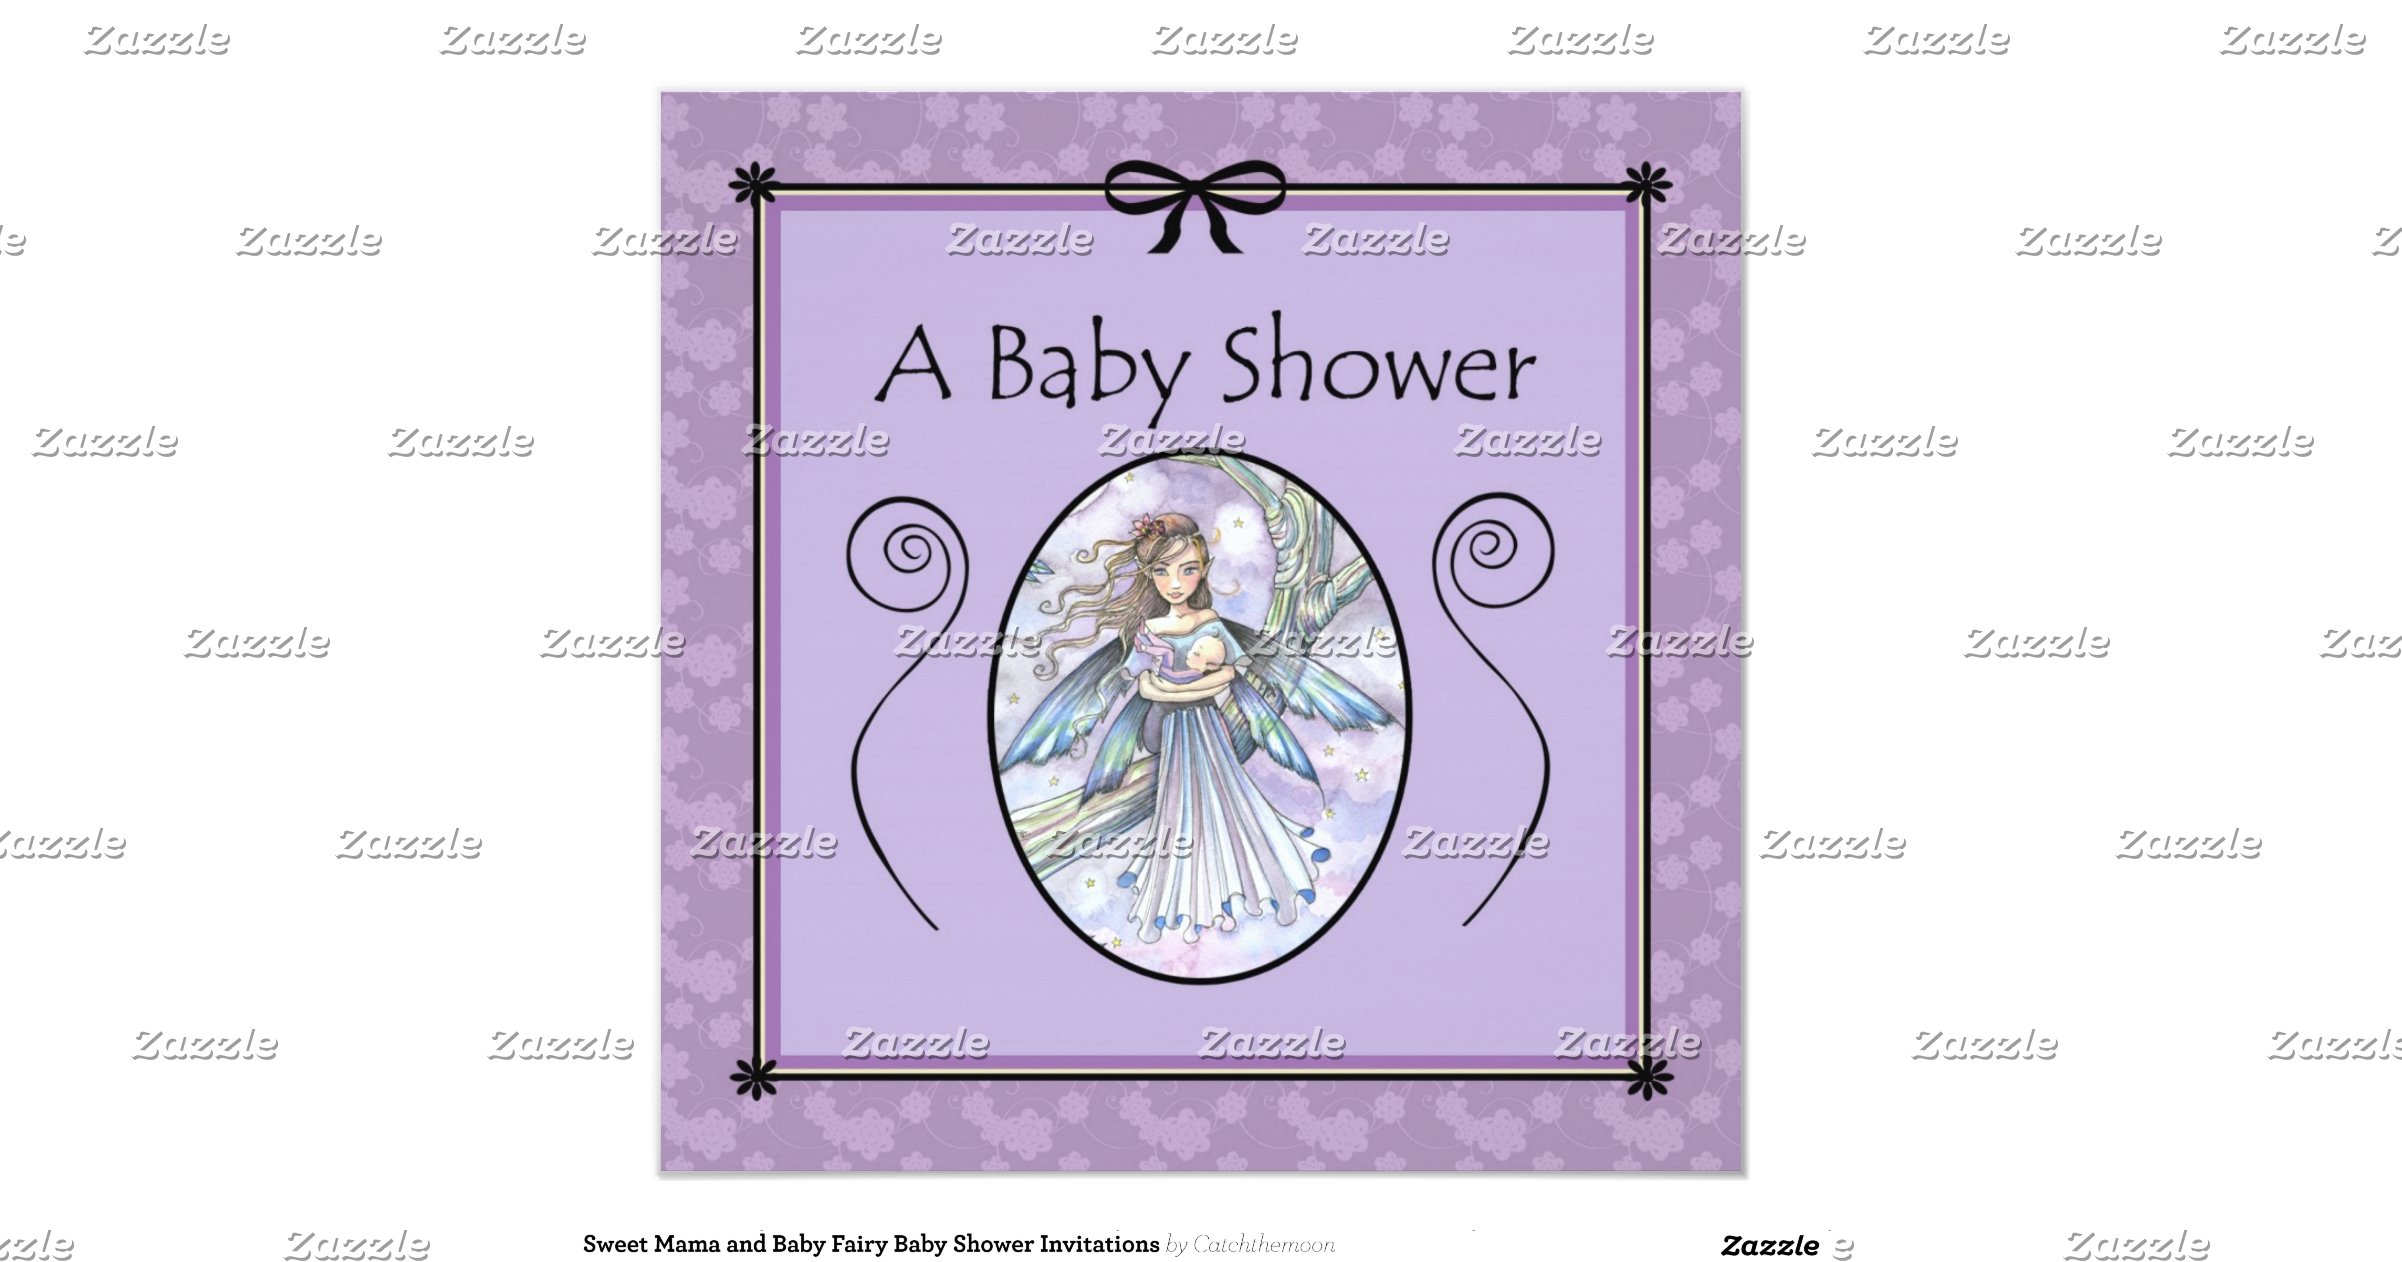 sweet_mama_and_baby_fairy_baby_shower_invitations ...